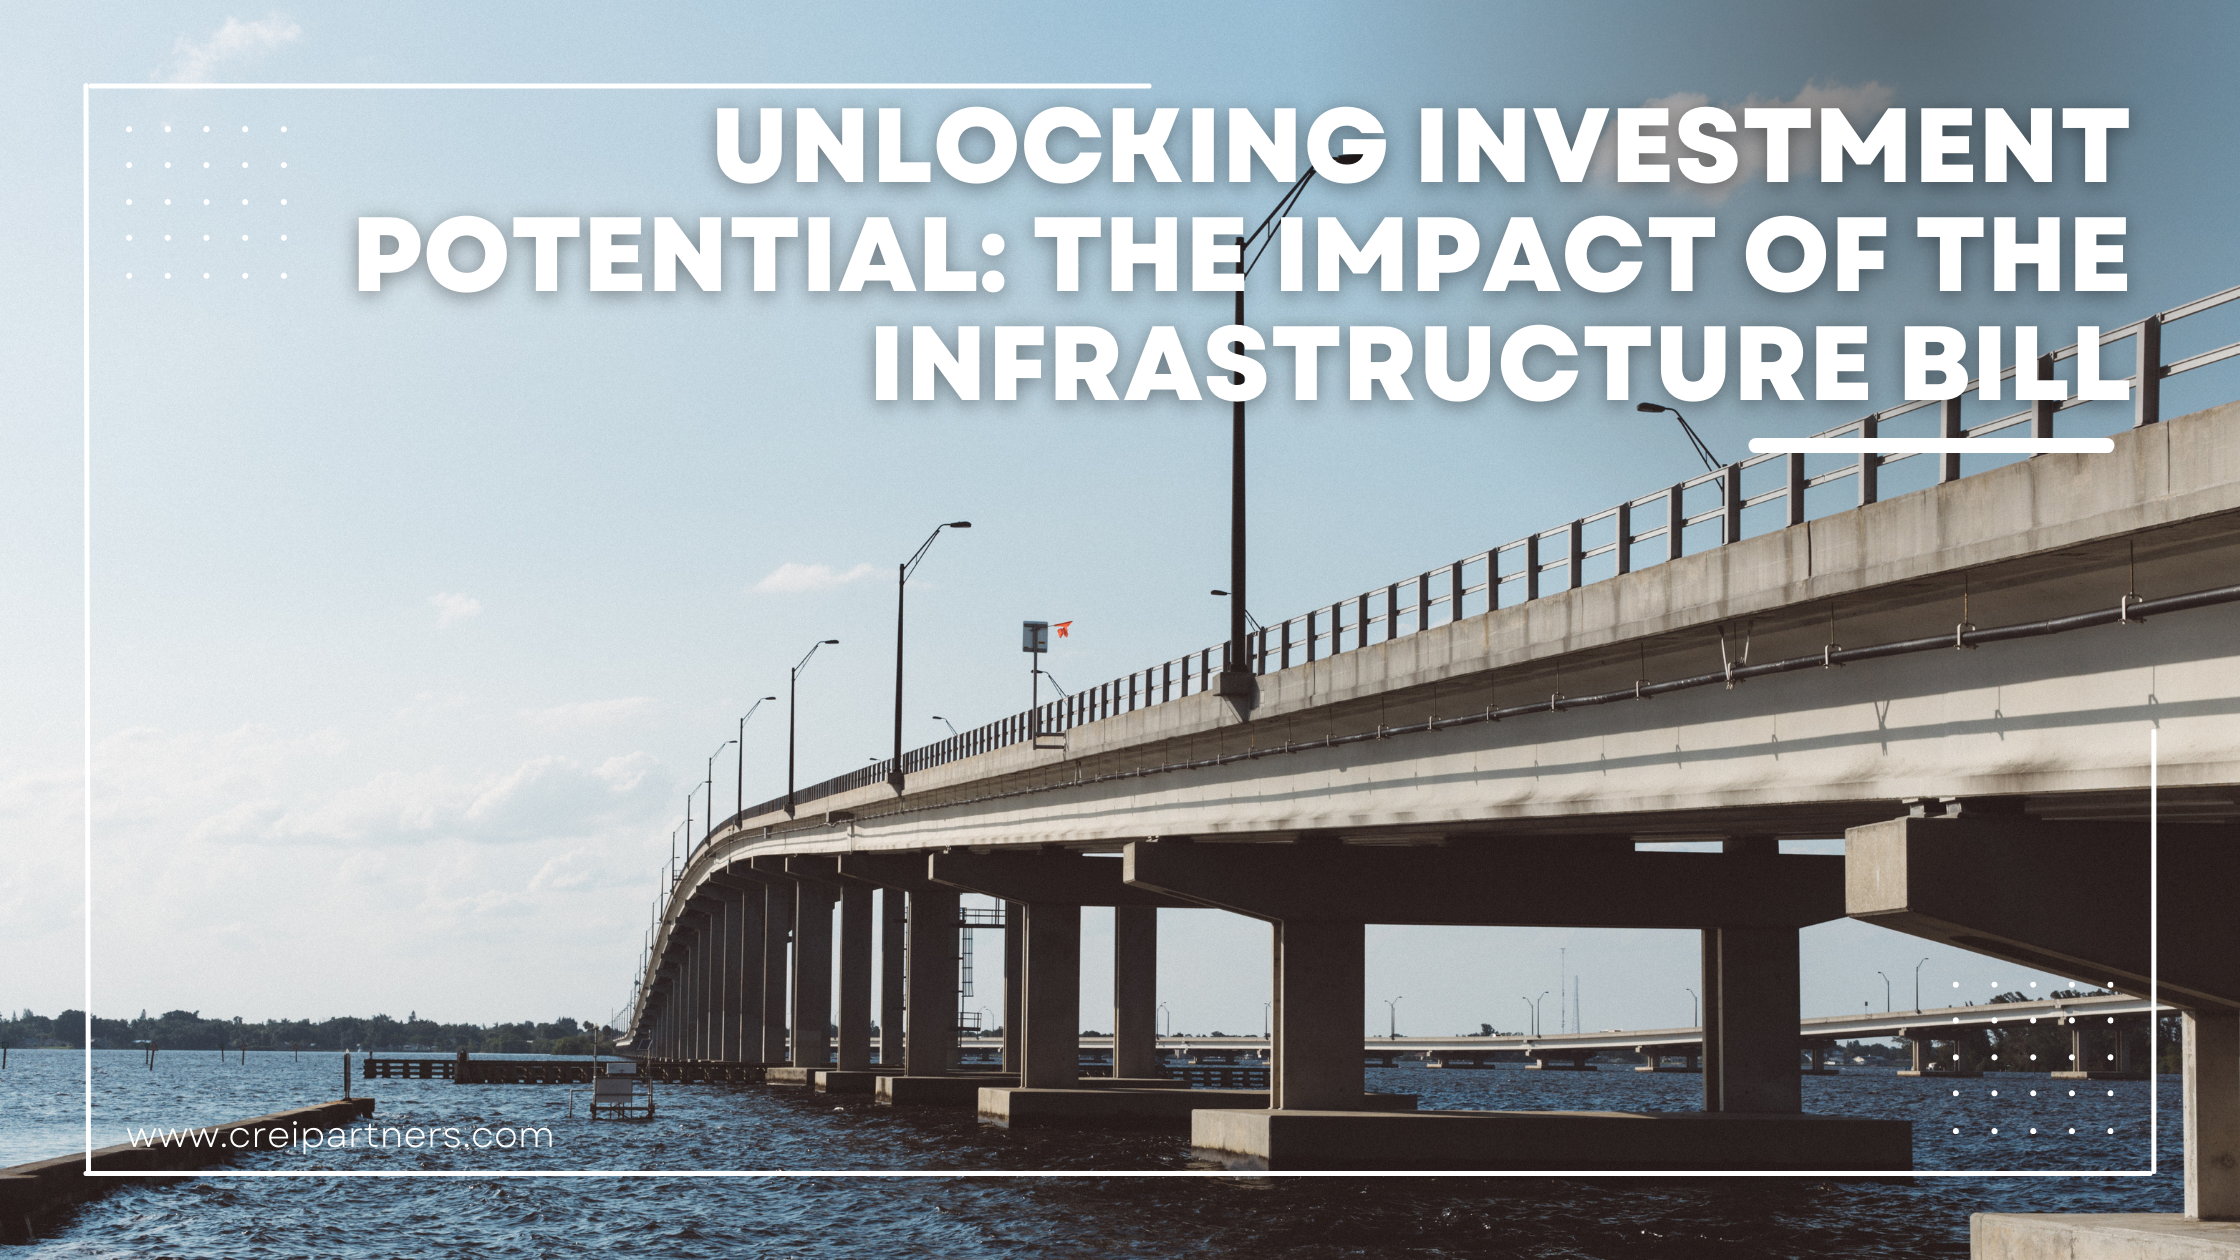 Unlocking Investment Potential: The Impact of the Infrastructure Bill